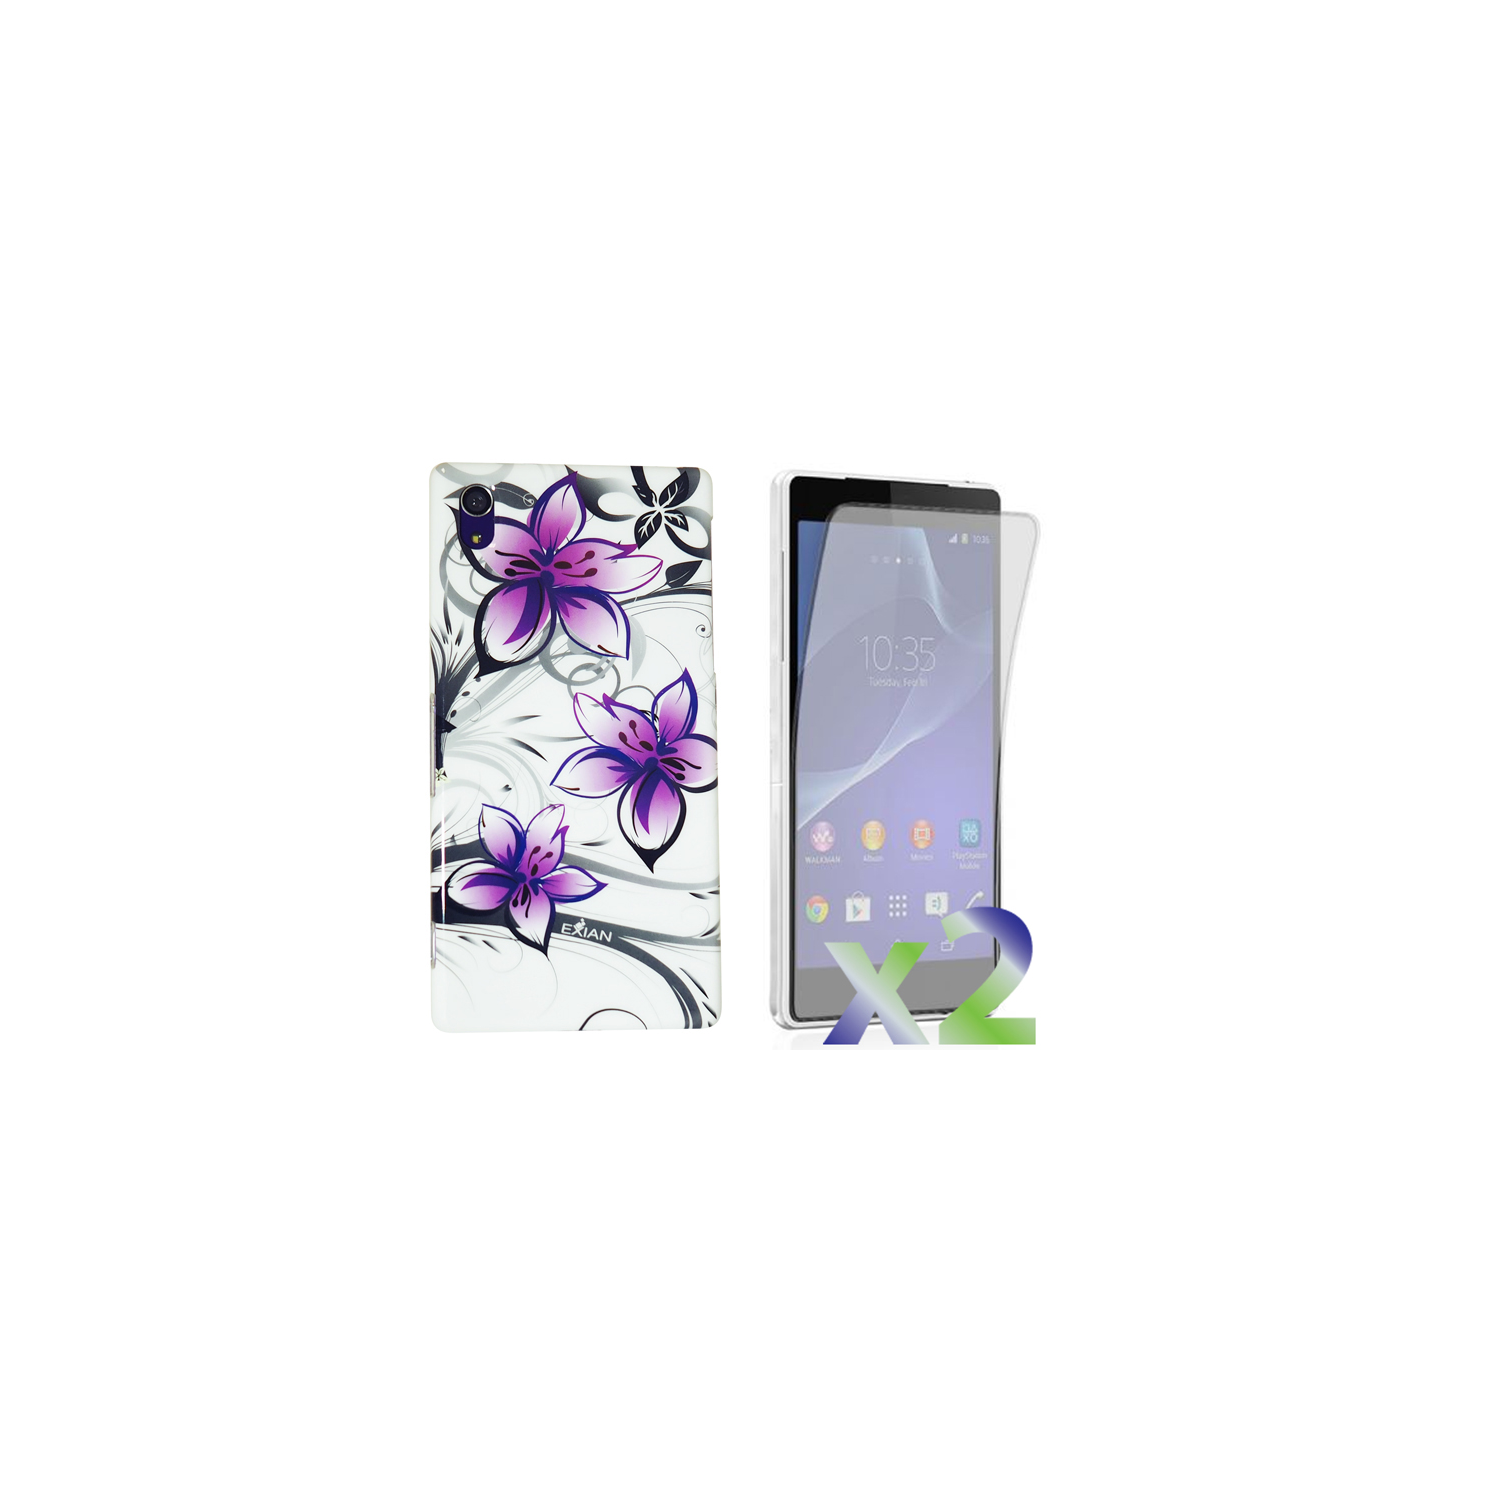 Exian Sony Xperia Z2 Screen Protectors X 2 and TPU Case Exian Design Purple Floral